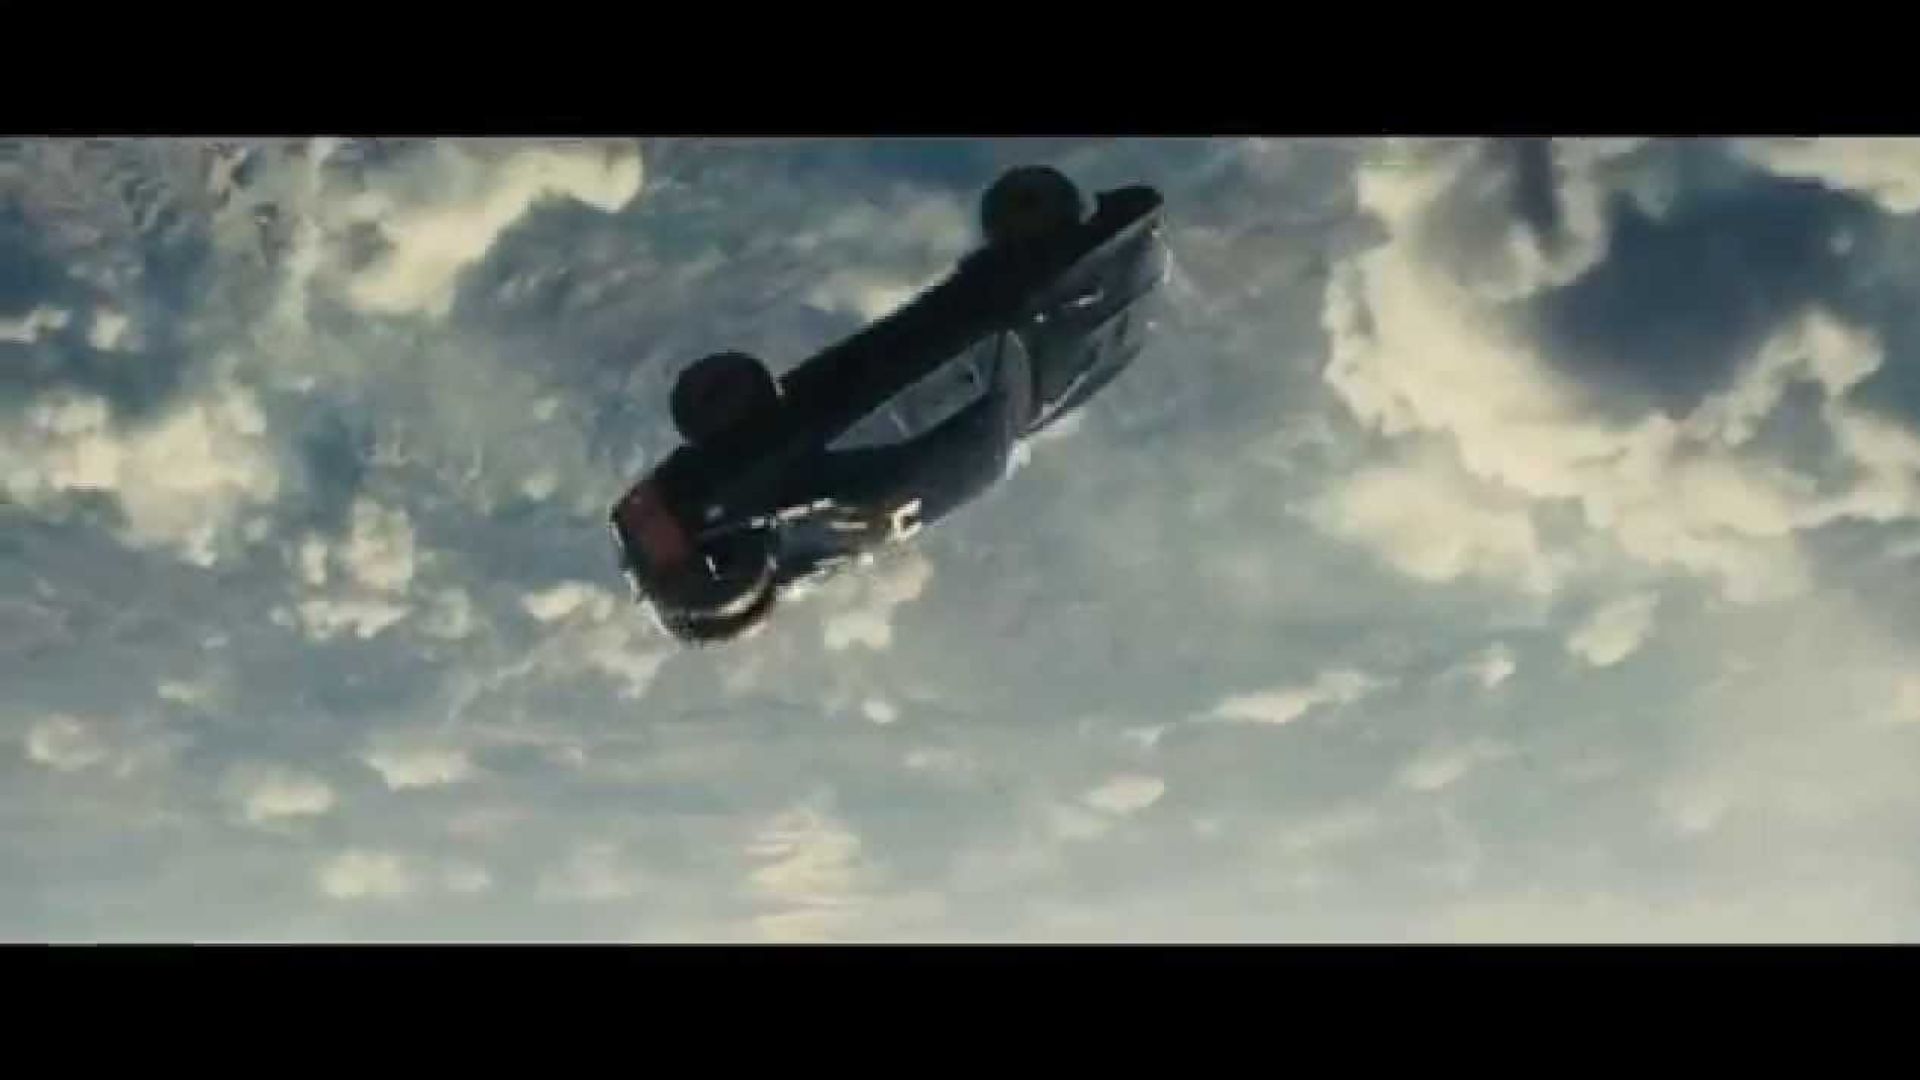 Roman gets dragged out of plane in Furious 7 flying cars clip